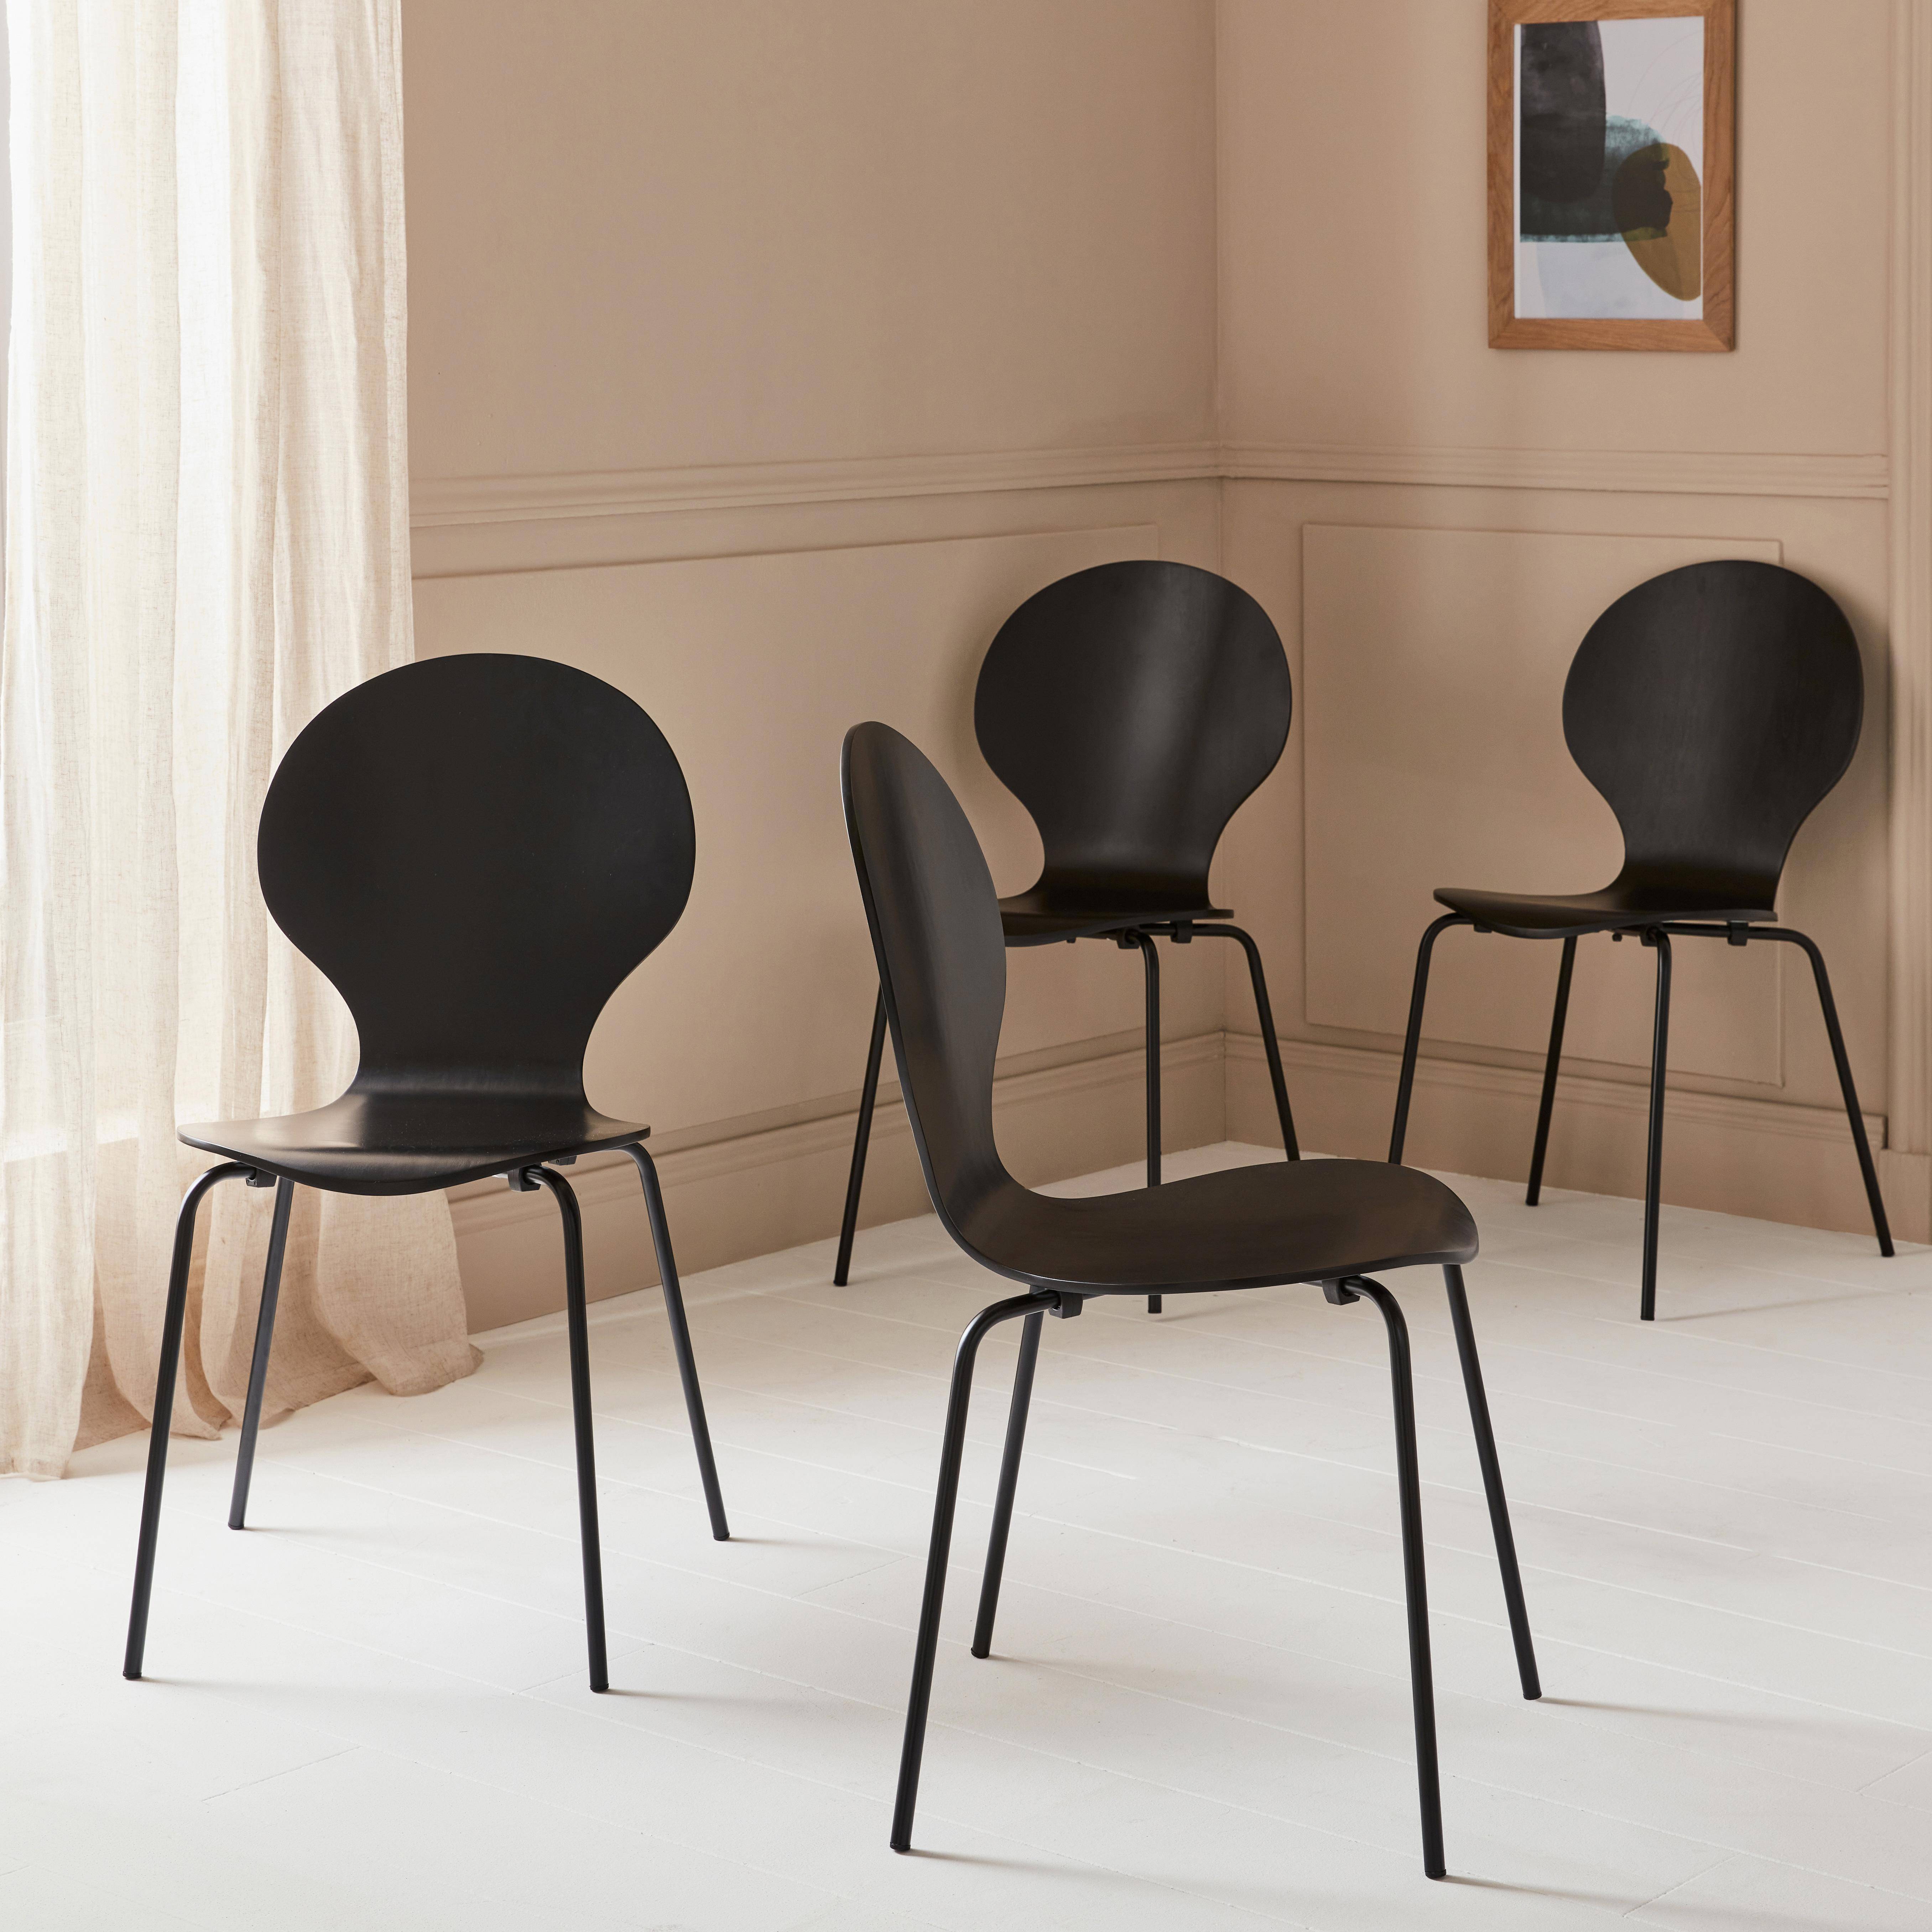 Set of 4 stackable Retro Chairs, Wood and Plywood, black,  L43 x W48 x H87cm,sweeek,Photo1